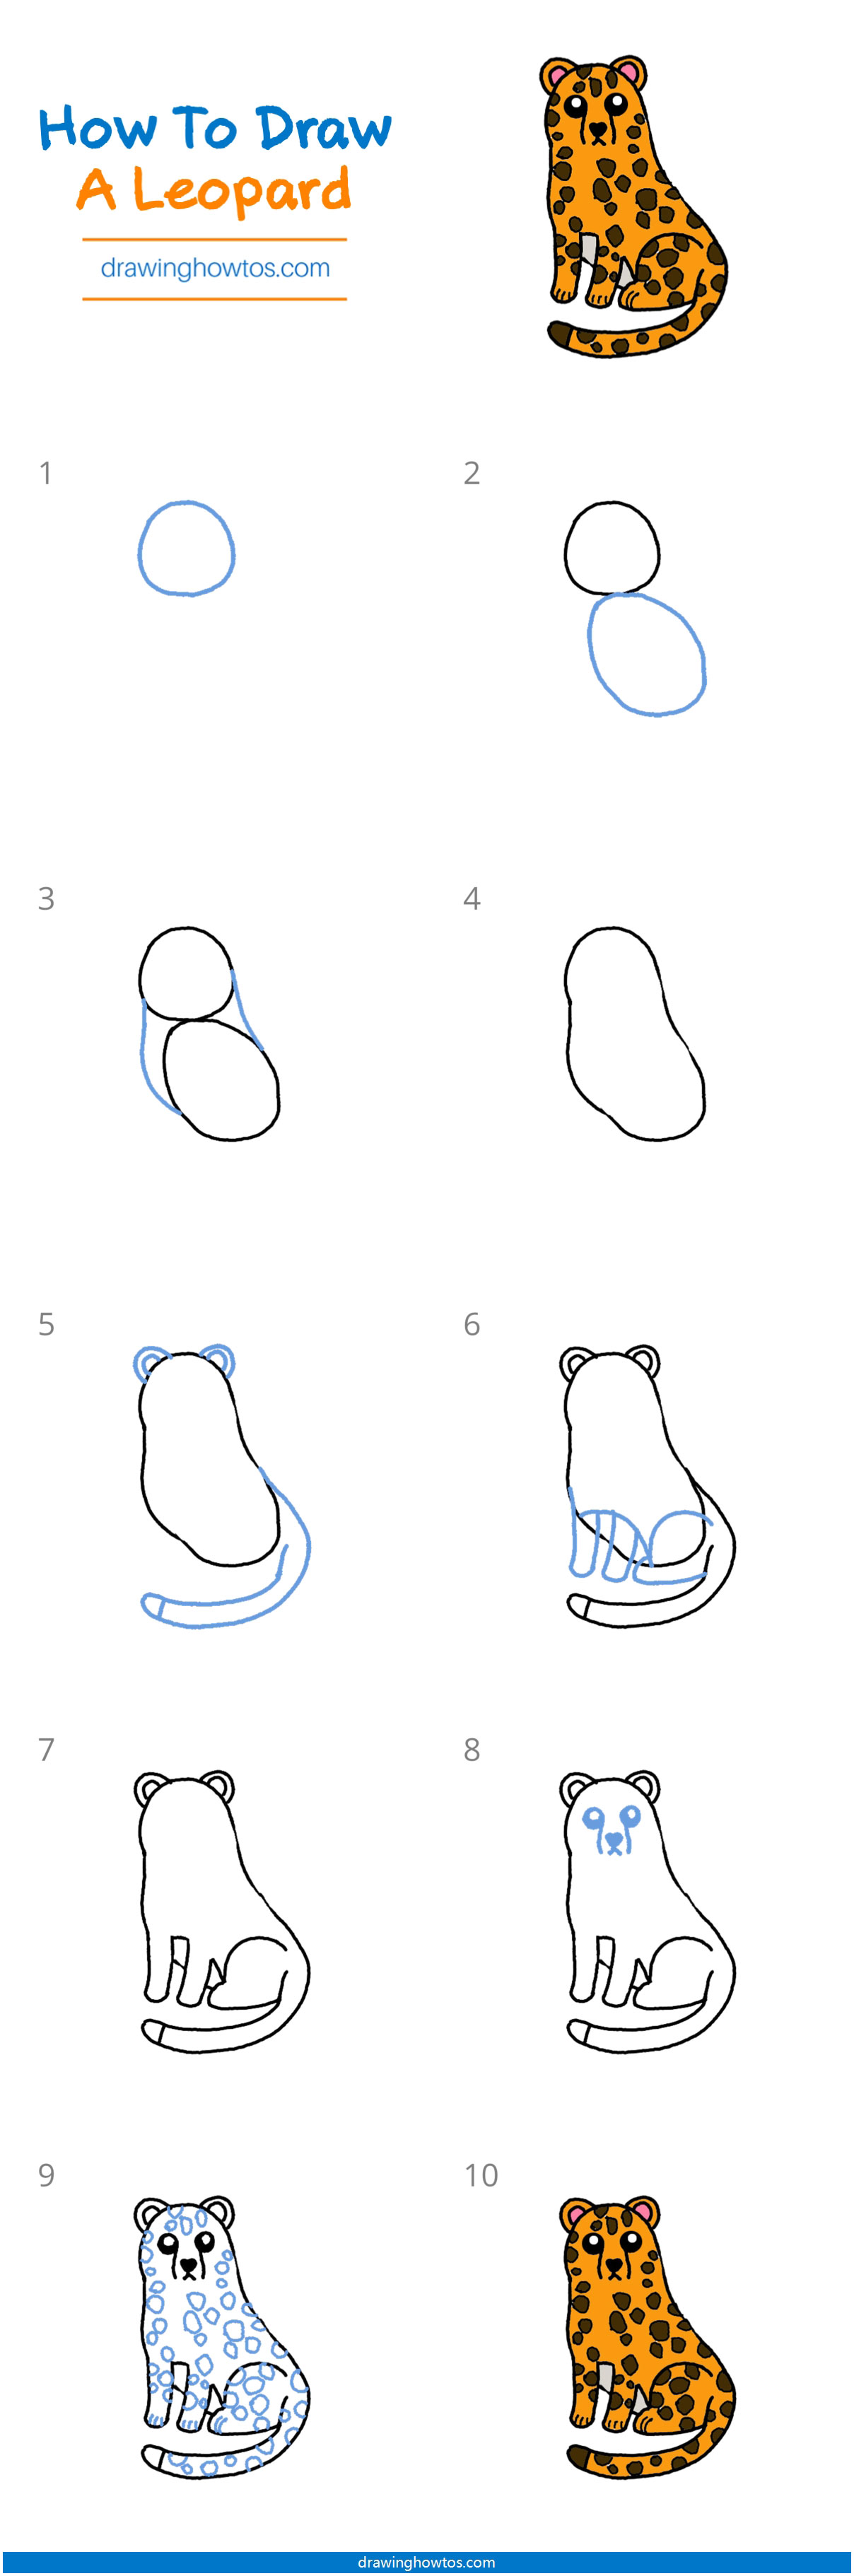 How to Draw an African Leopard Step by Step